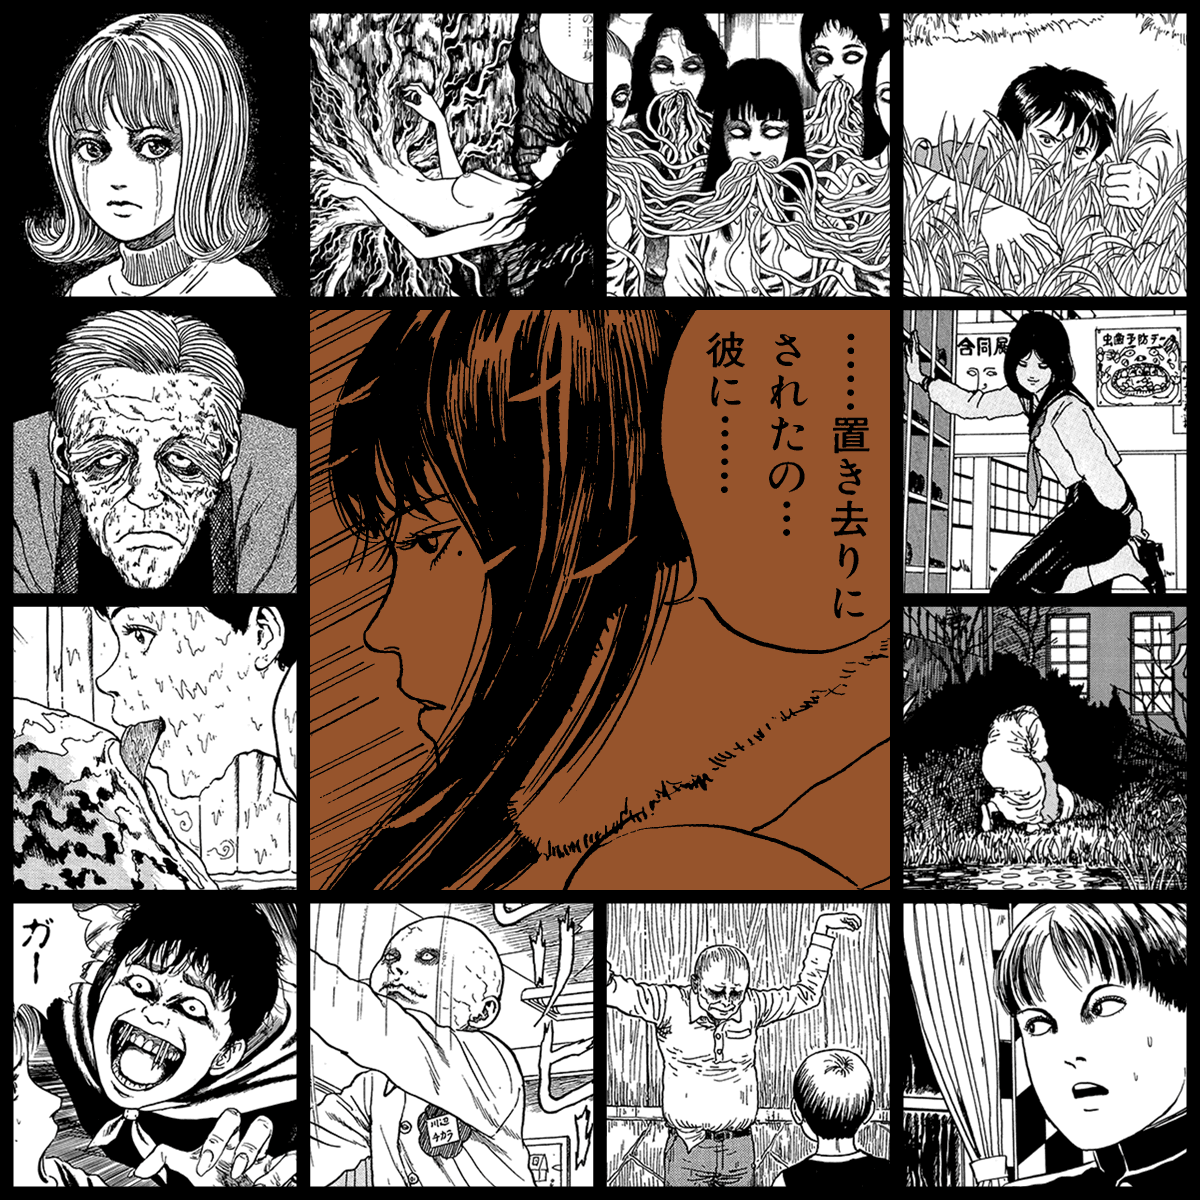 TOMIE by Junji Ito #678